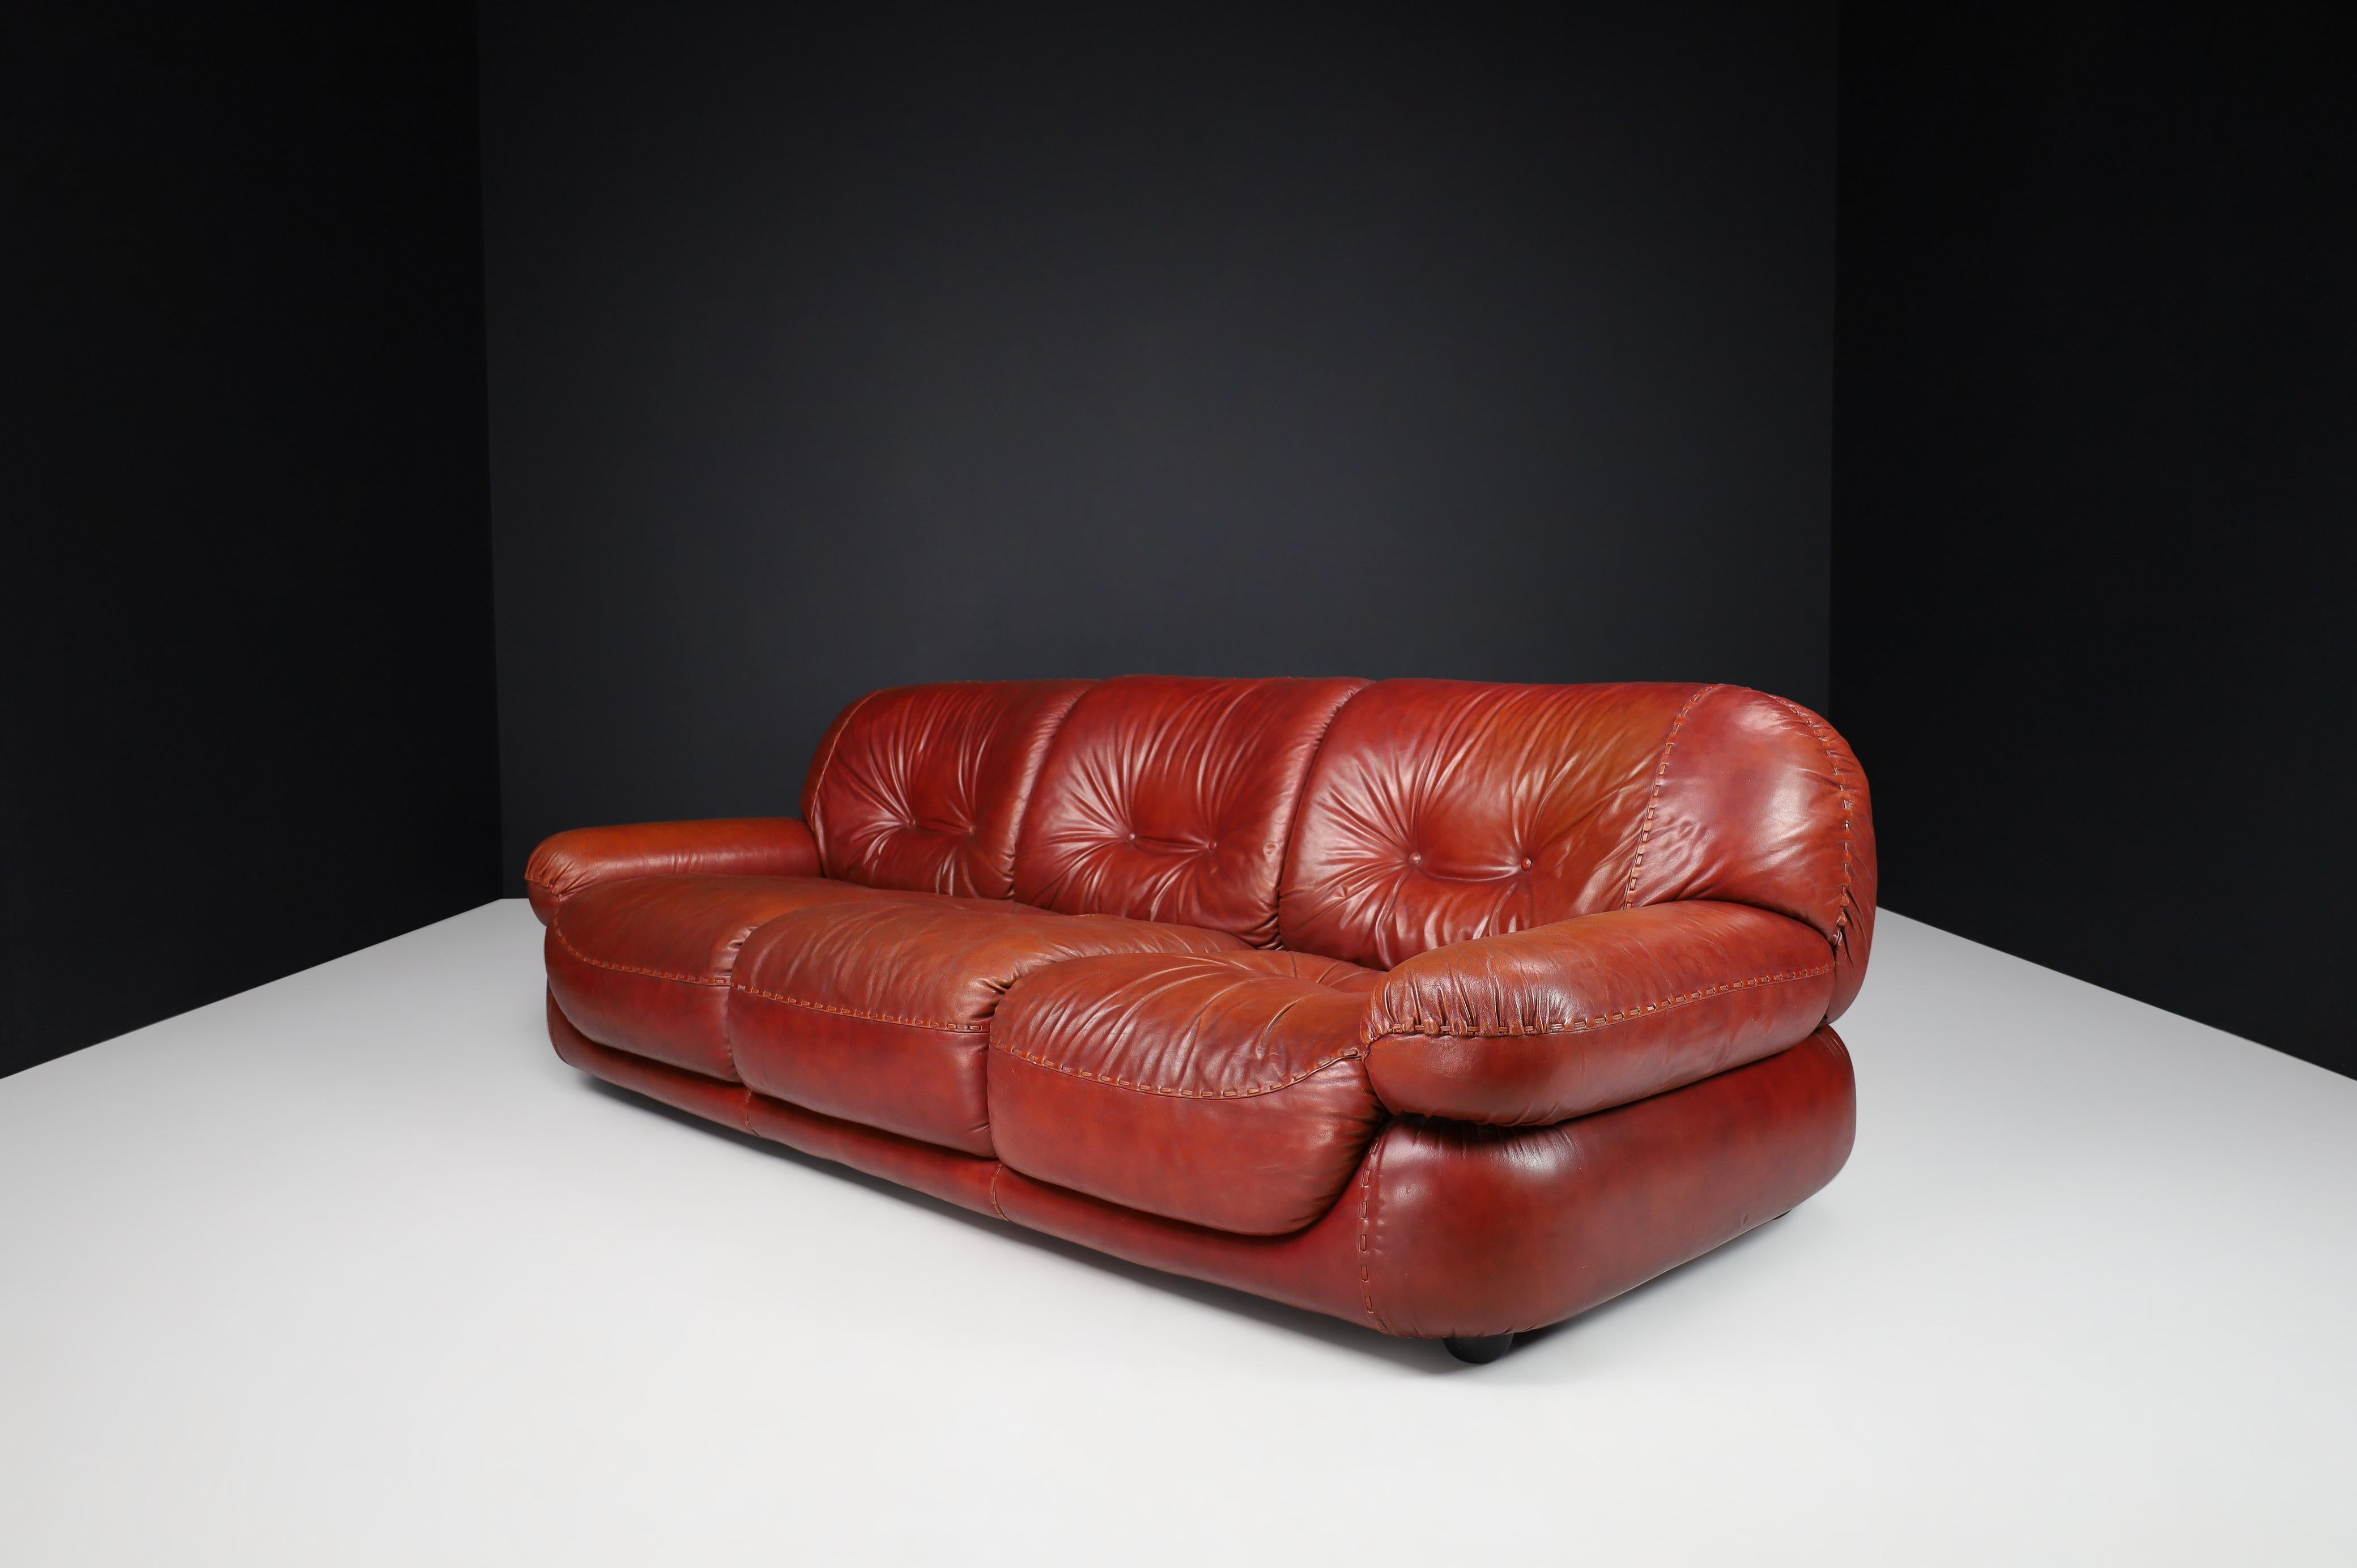 Large Lounge Sofa in Bordeaux Leather by Sapporo for Mobil Girgi, Italy, 1970 For Sale 4